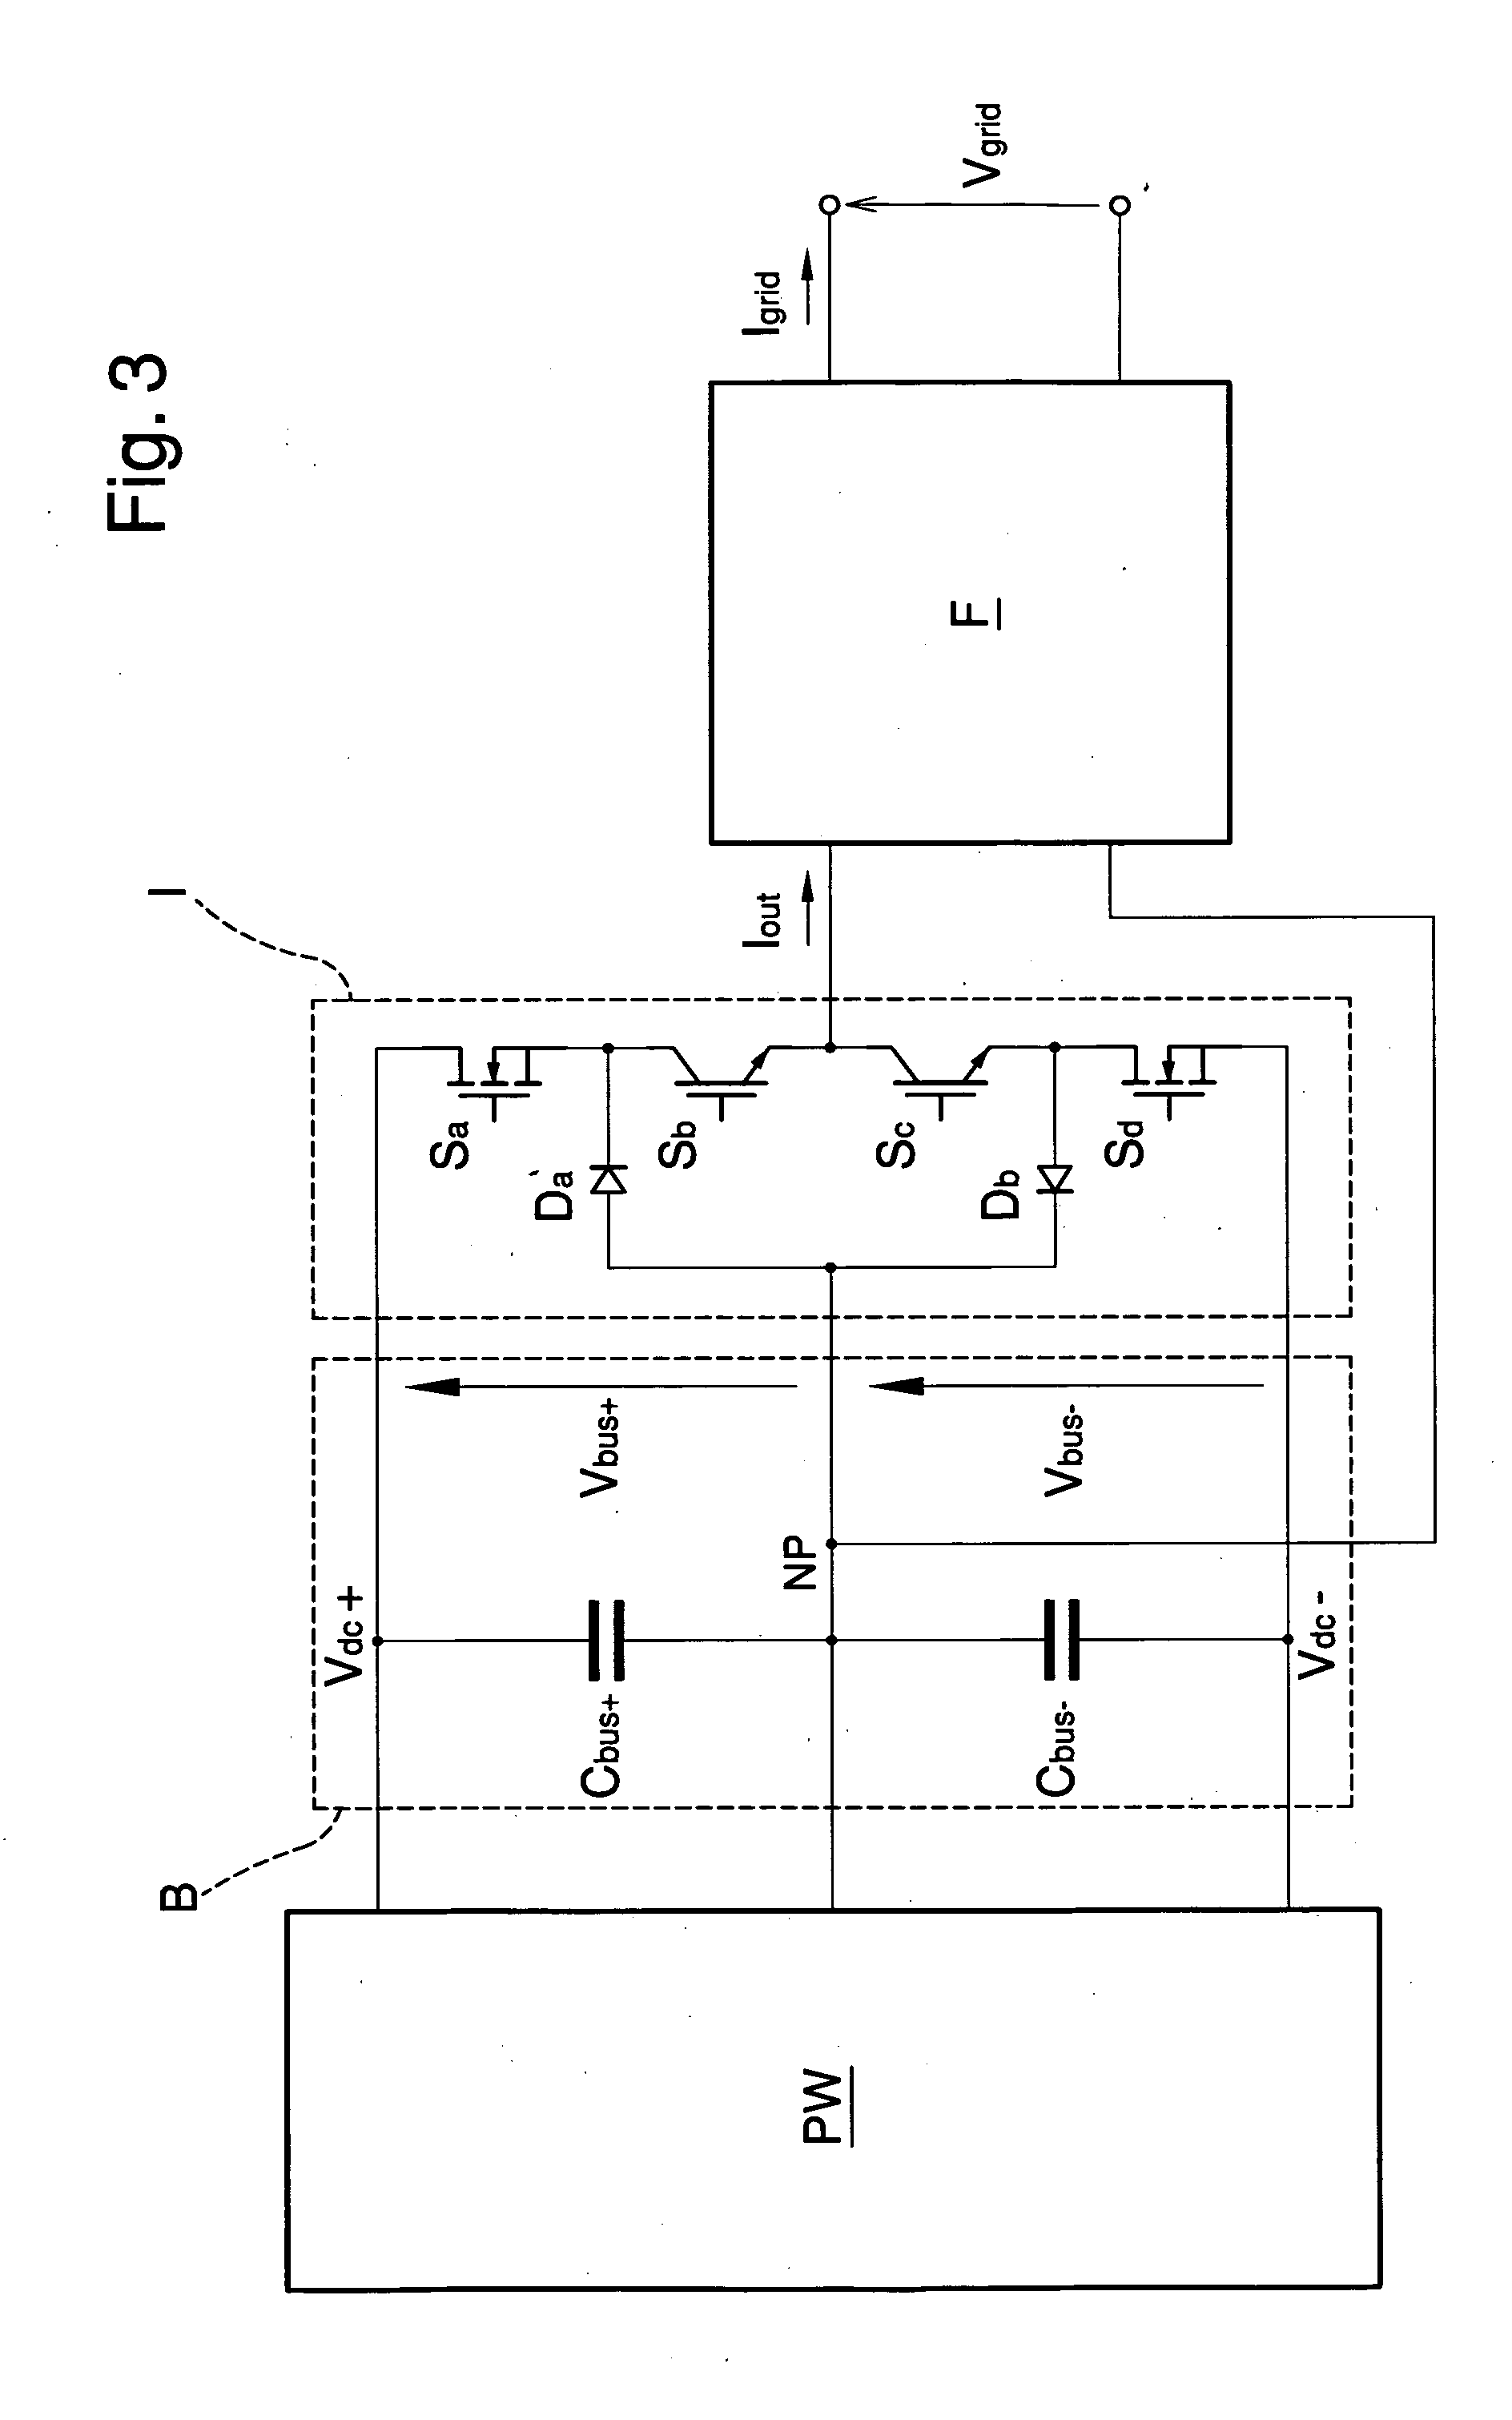 System and method for offsetting the input voltage unbalance in multilevel inverters or the like